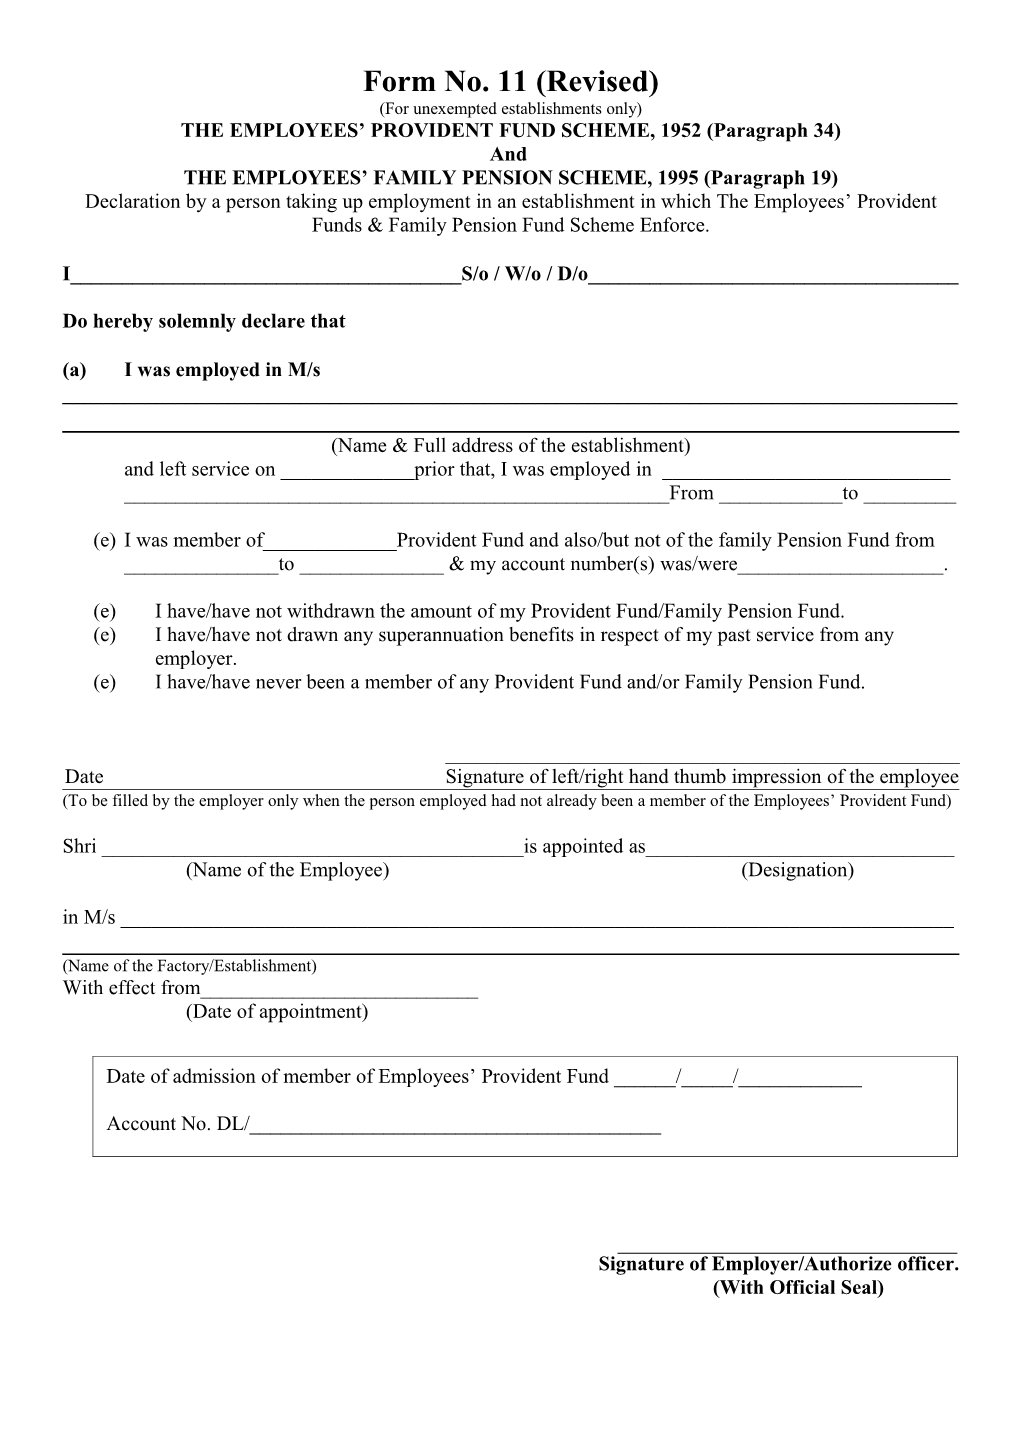 FORM NO. 2 (Revised)